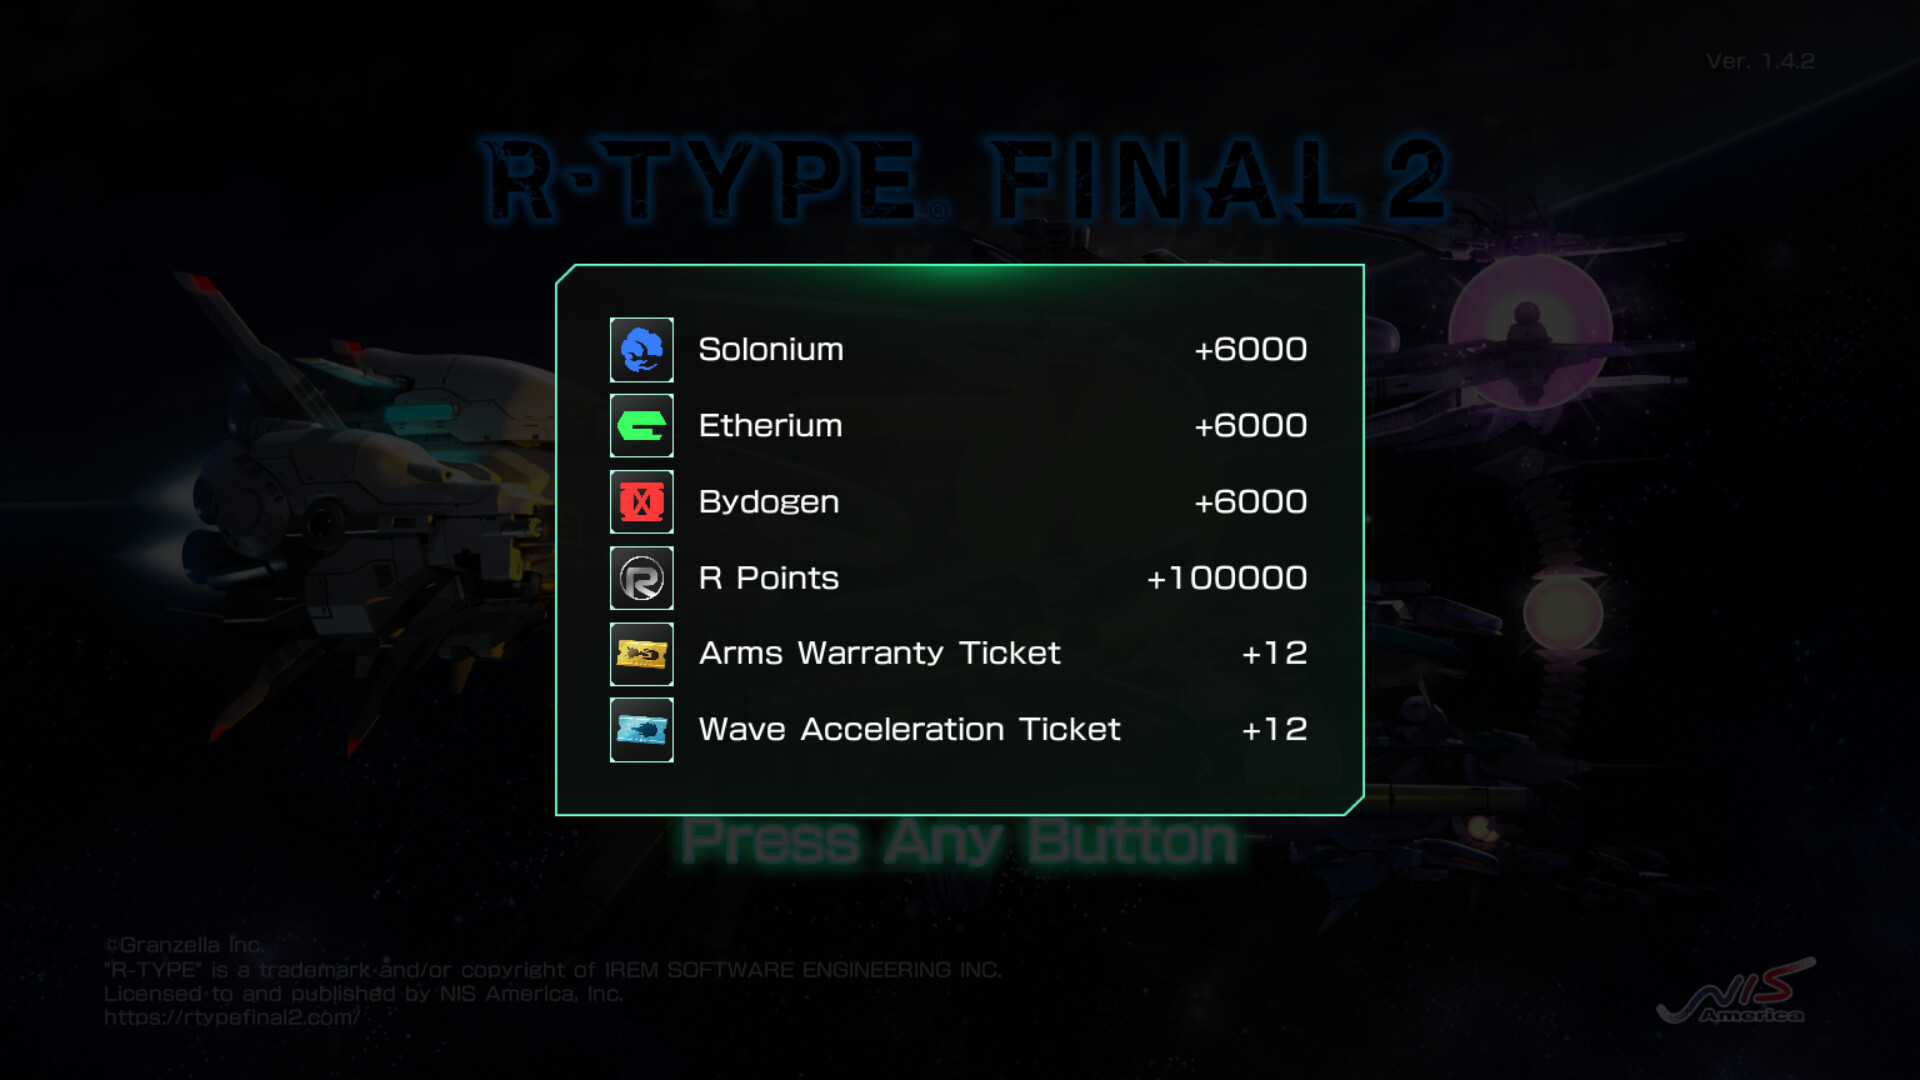 R-Type Final 2 - Ace Pilot Special Training Pack II DLC Steam CD Key 4.66 usd